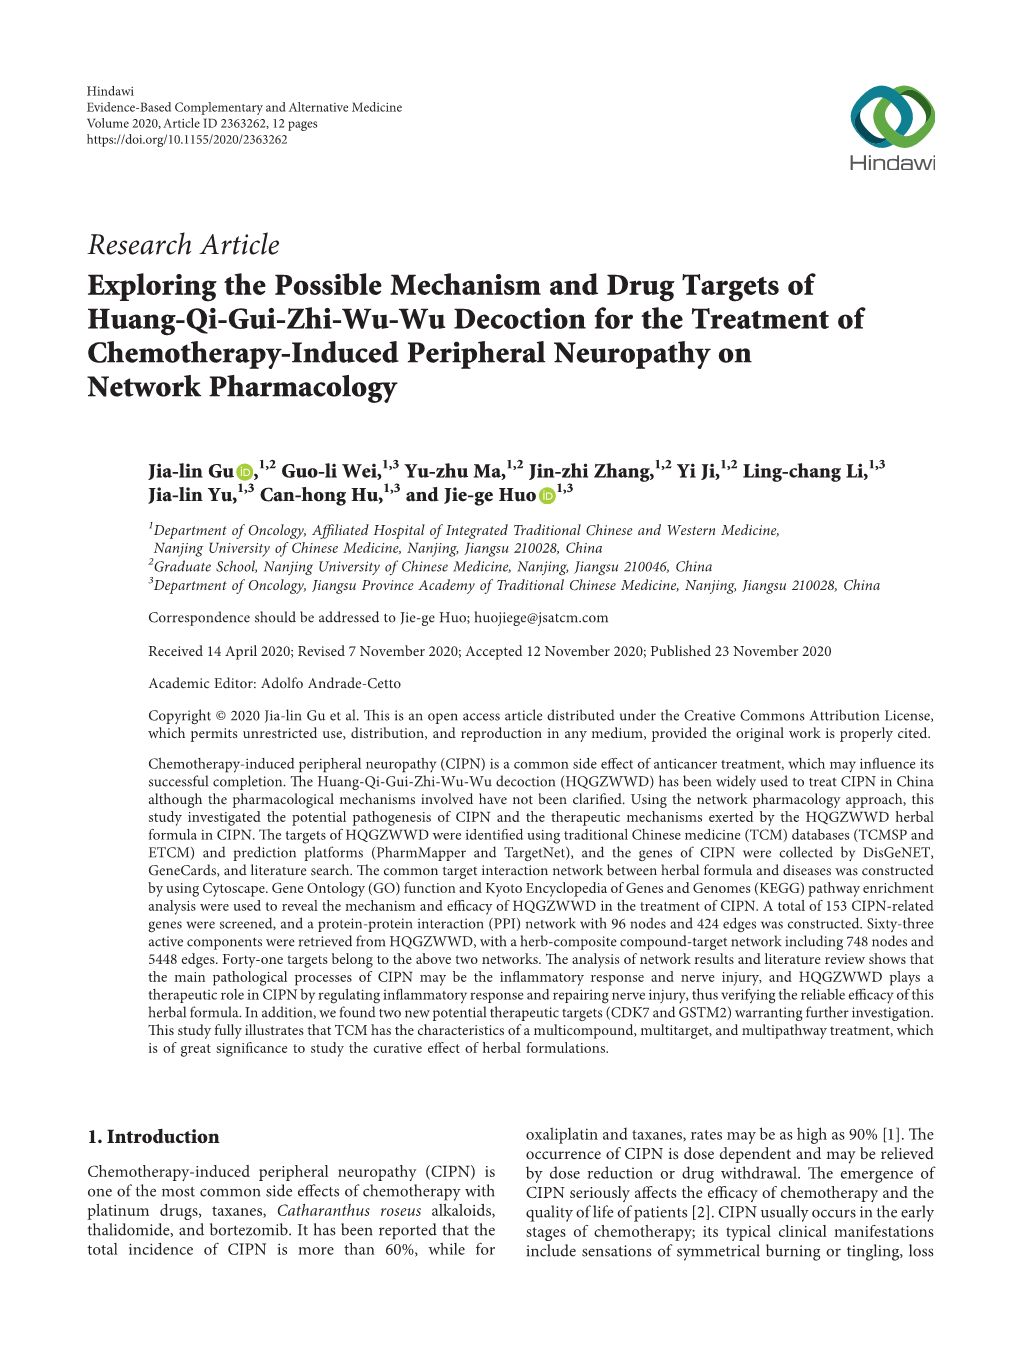 Exploring the Possible Mechanism and Drug Targets of Huang-Qi-Gui